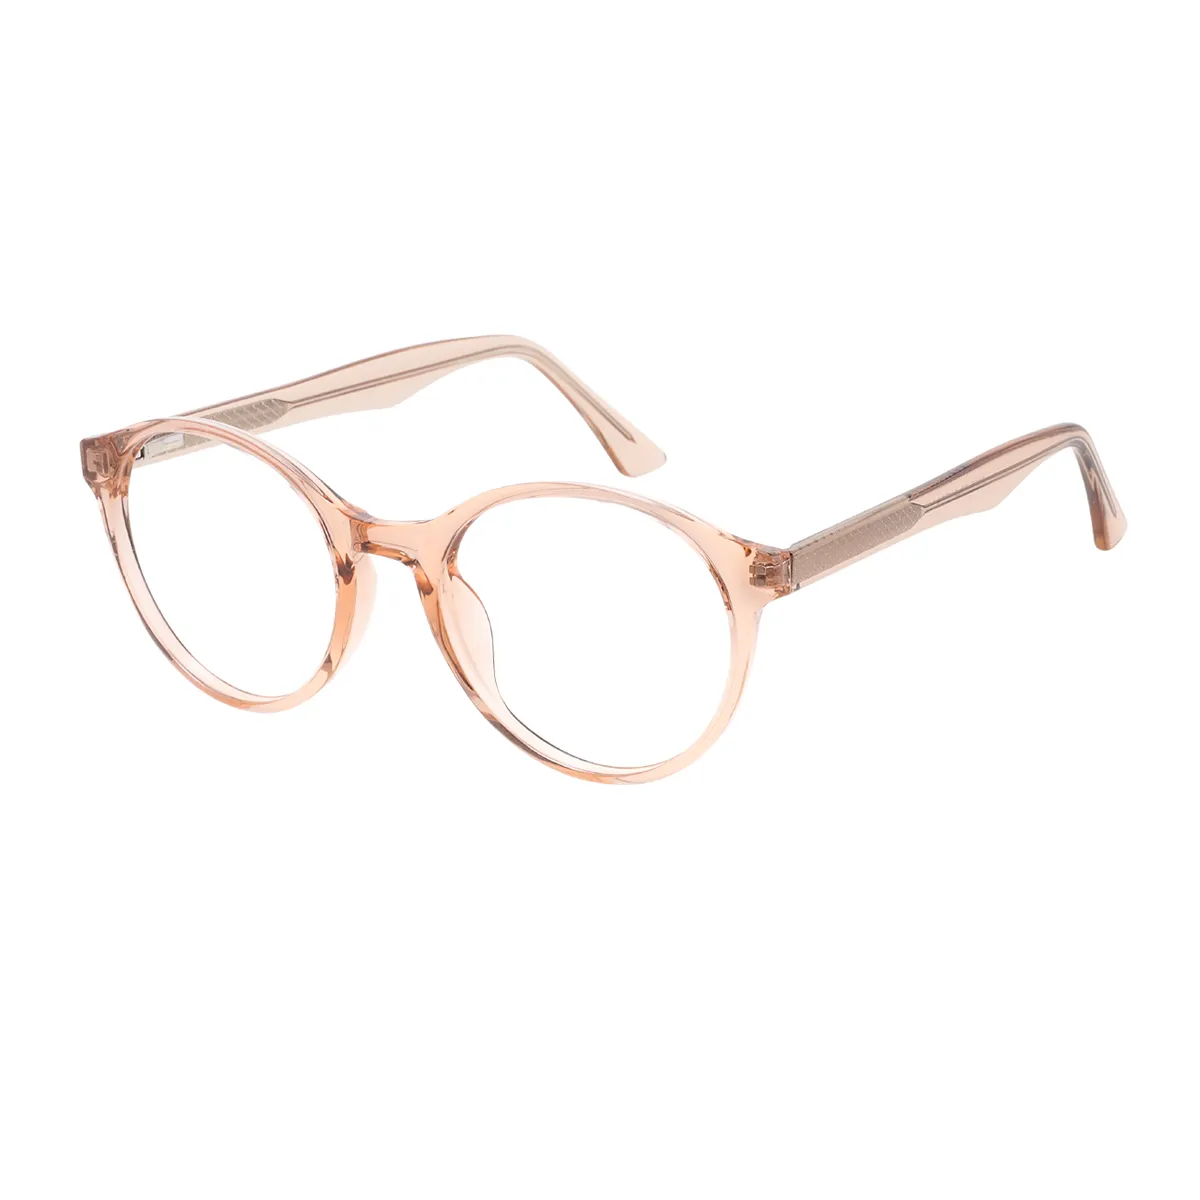 Amity - Round brown Glasses for Women - EFE